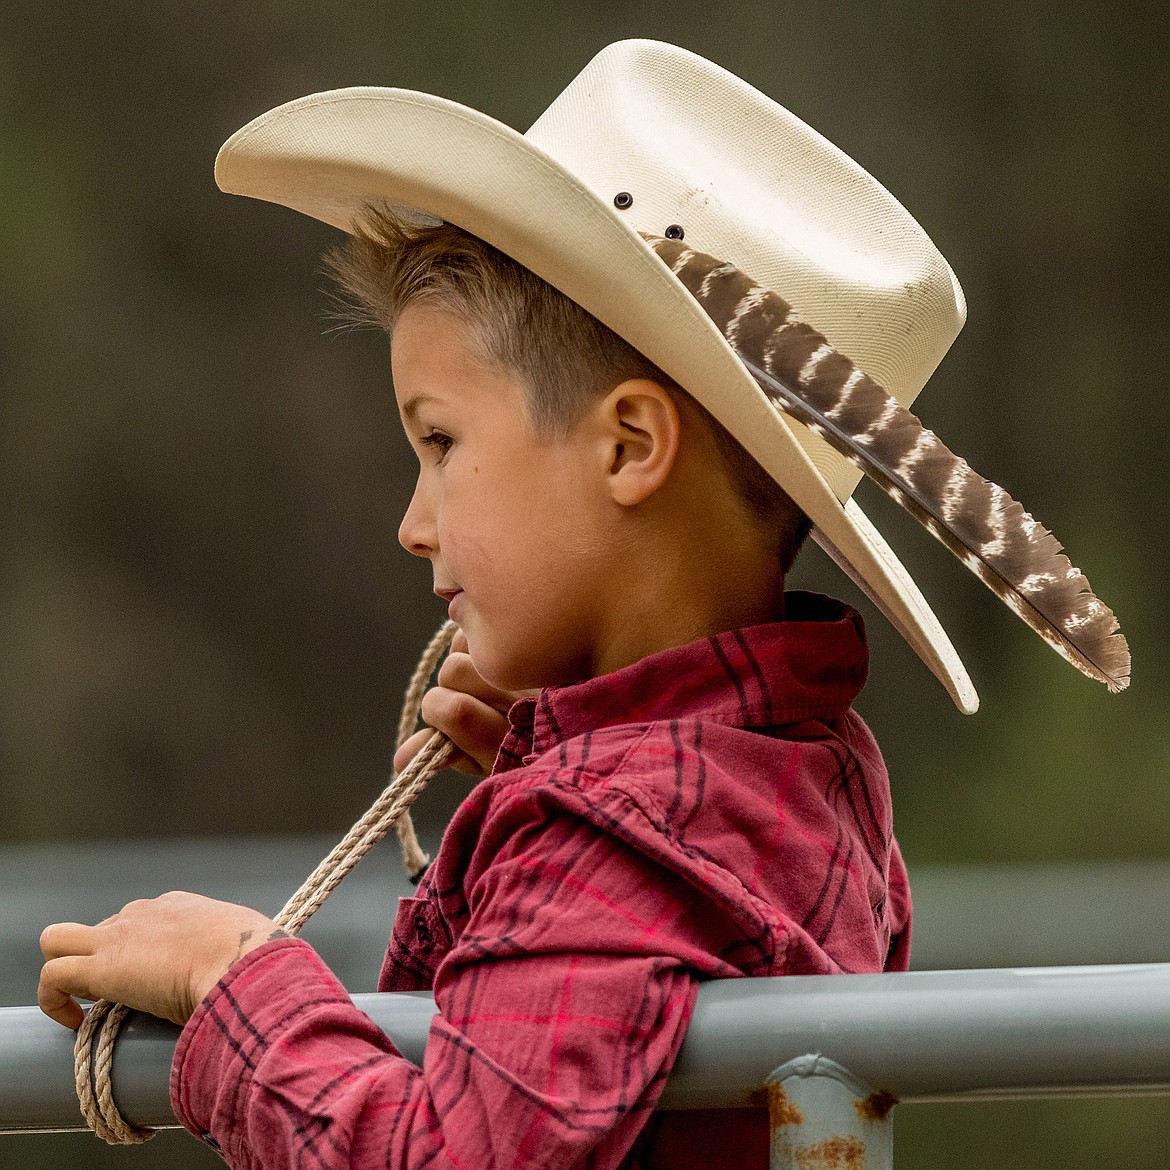 Lane Eash, 6, of Trego watches the action at Saturday night&#146;s Incredi-Bull event at J. Neils Park in Libby. His father, Gerald Eash, was one of the bull riders who competed. (John Blodgett/The Western News)